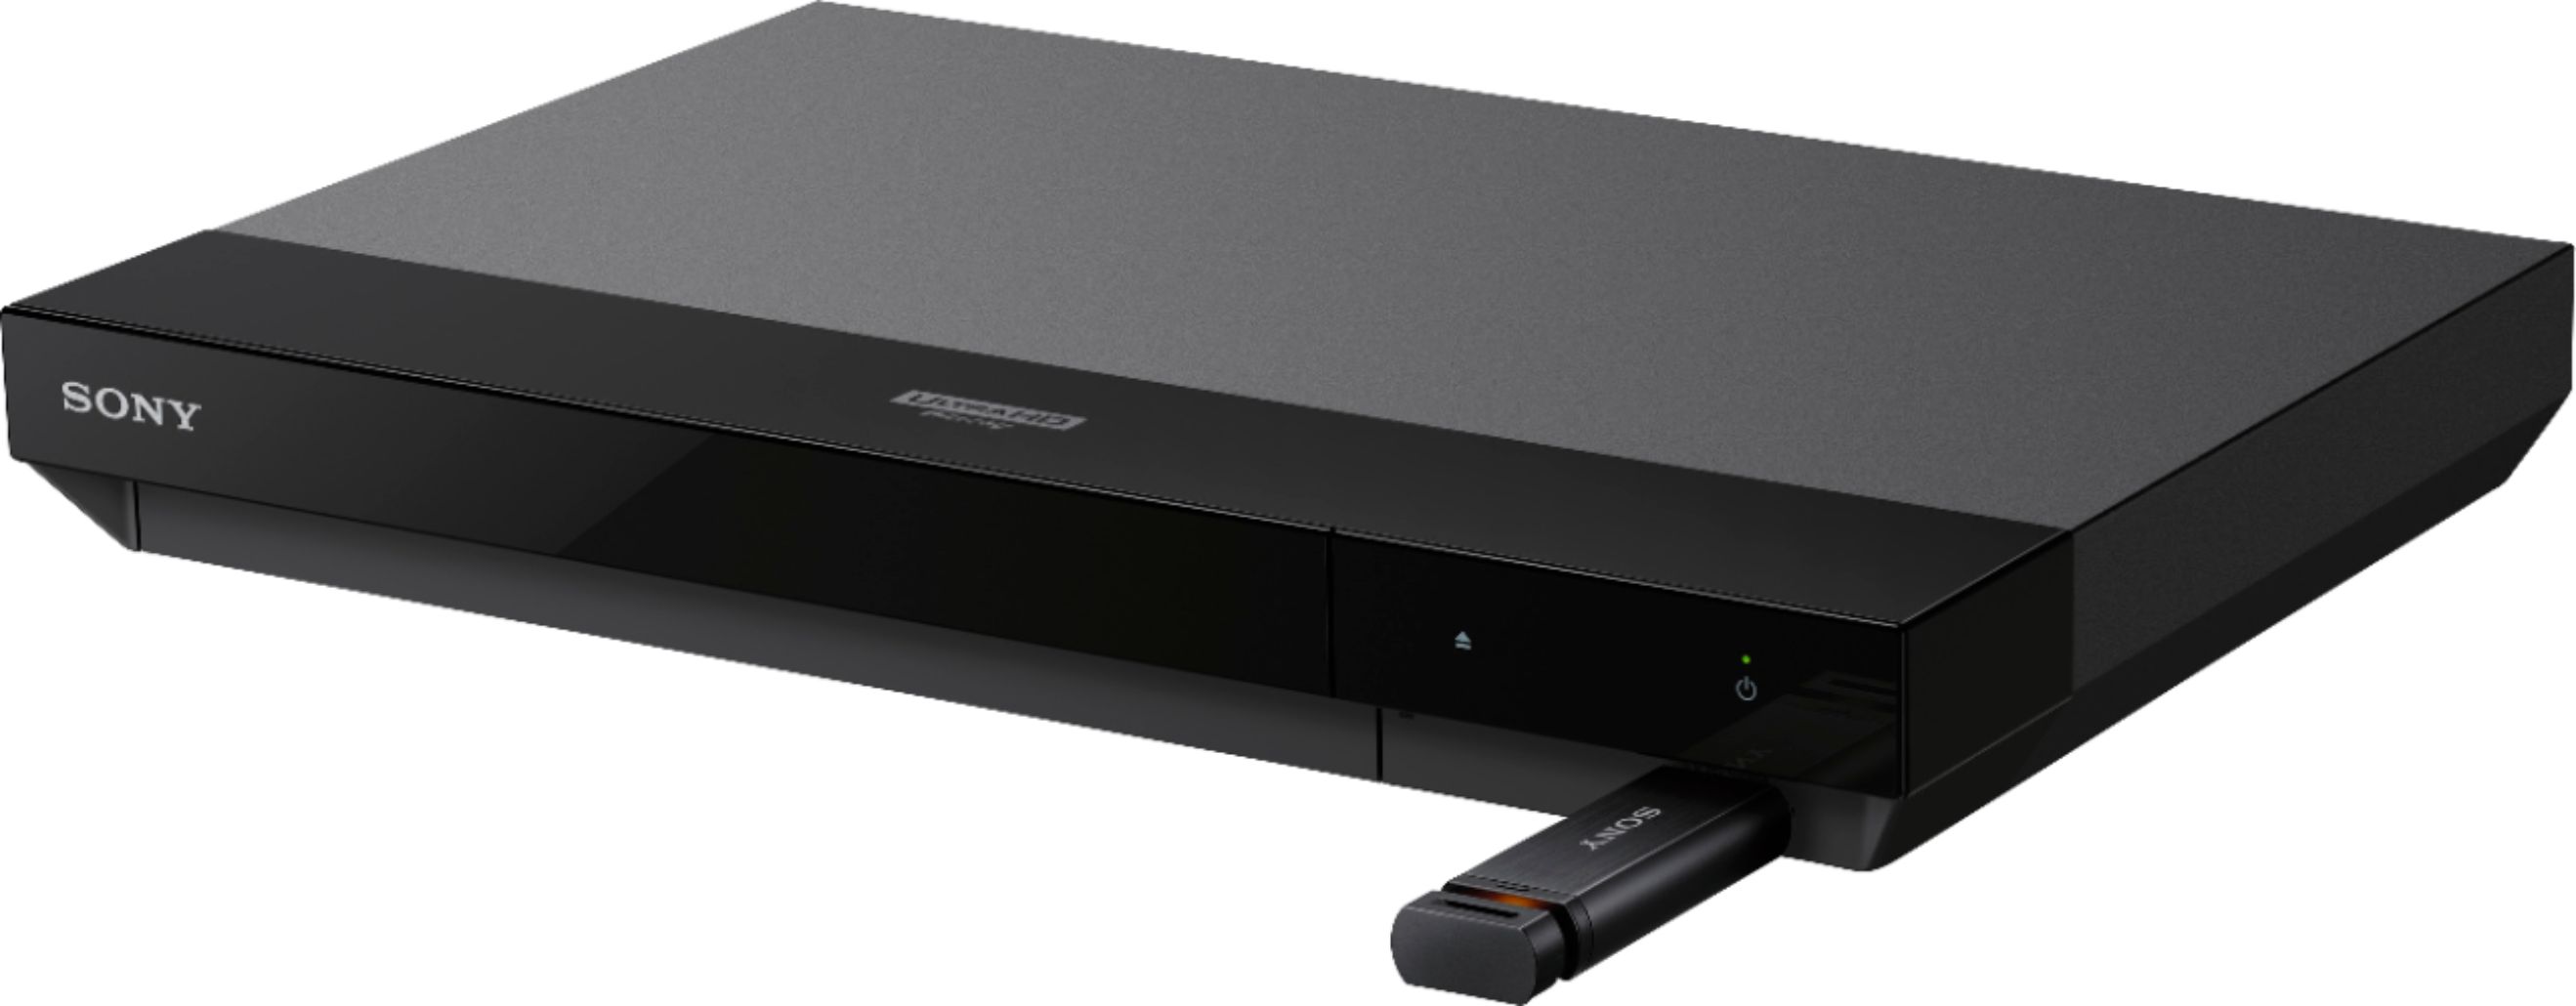 Angle View: Sony - UBP-X700/M Streaming 4K Ultra HD Blu-ray player with HDMI cable - Black